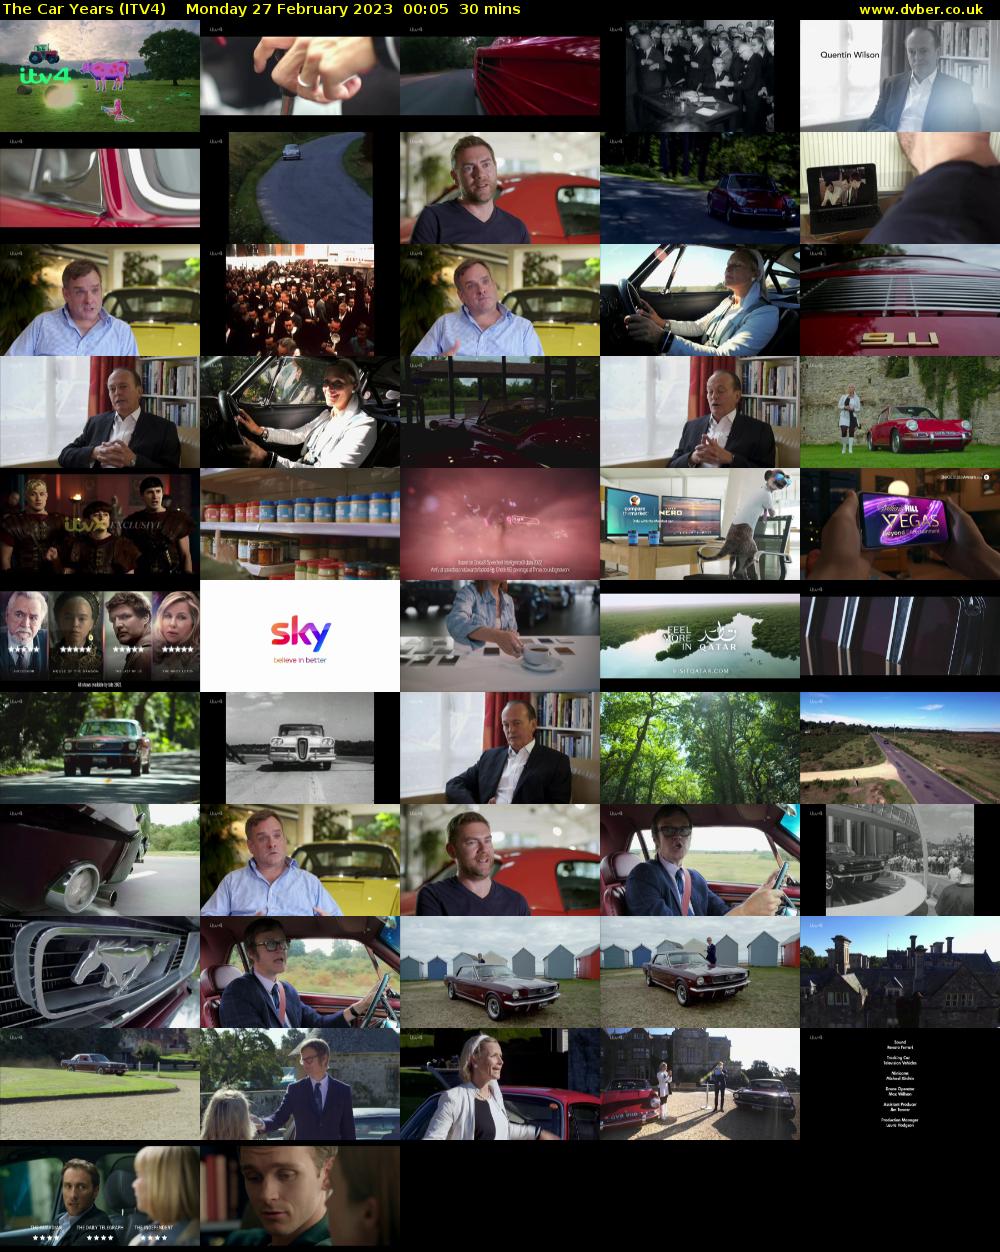 The Car Years (ITV4) Monday 27 February 2023 00:05 - 00:35